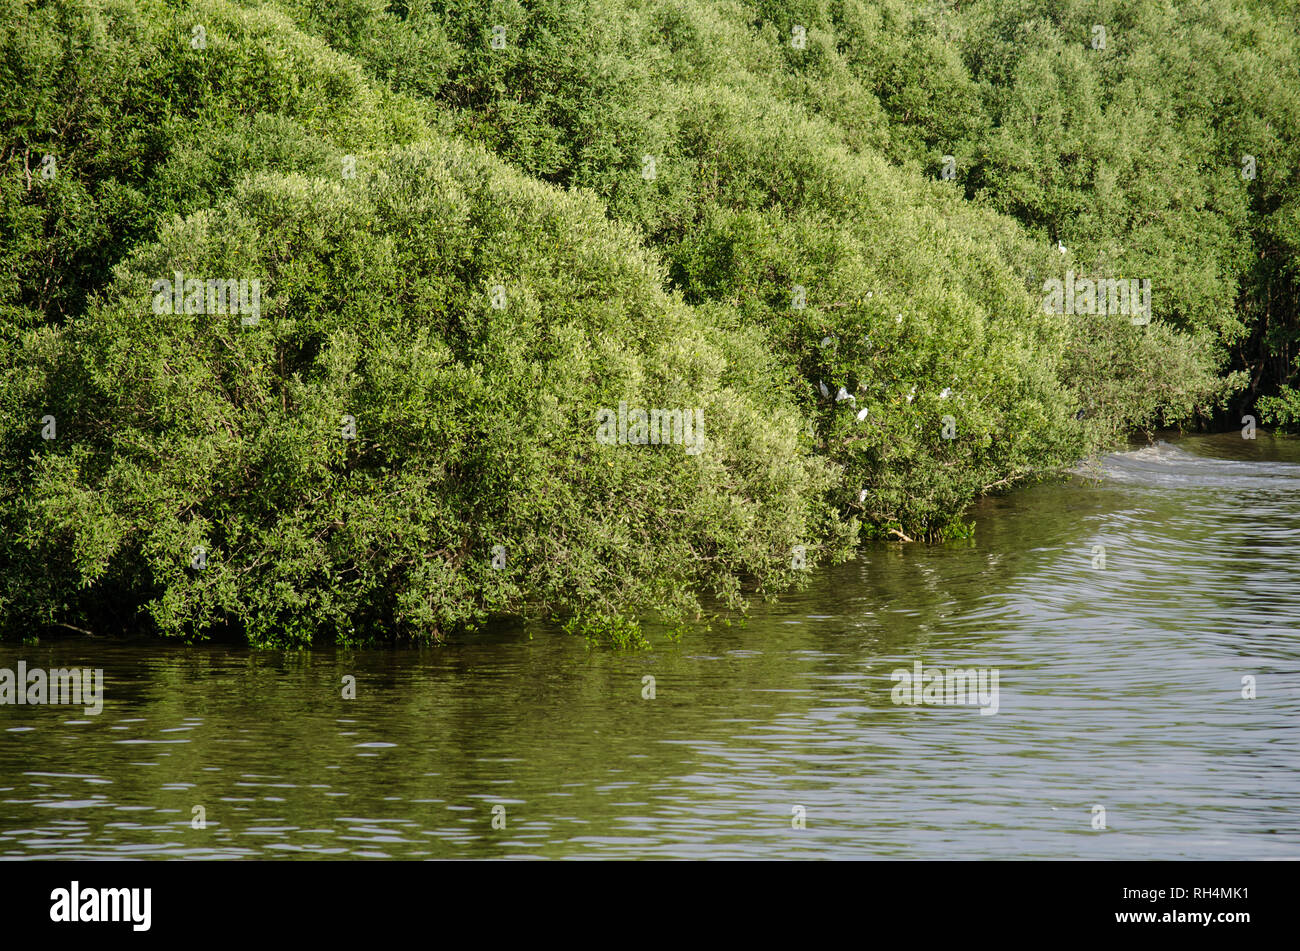 A section of the remain Panama Bay mangroves during high tide, in Panama Viejo coastline. Laguncularia racemosa is the predominant specie. Stock Photo